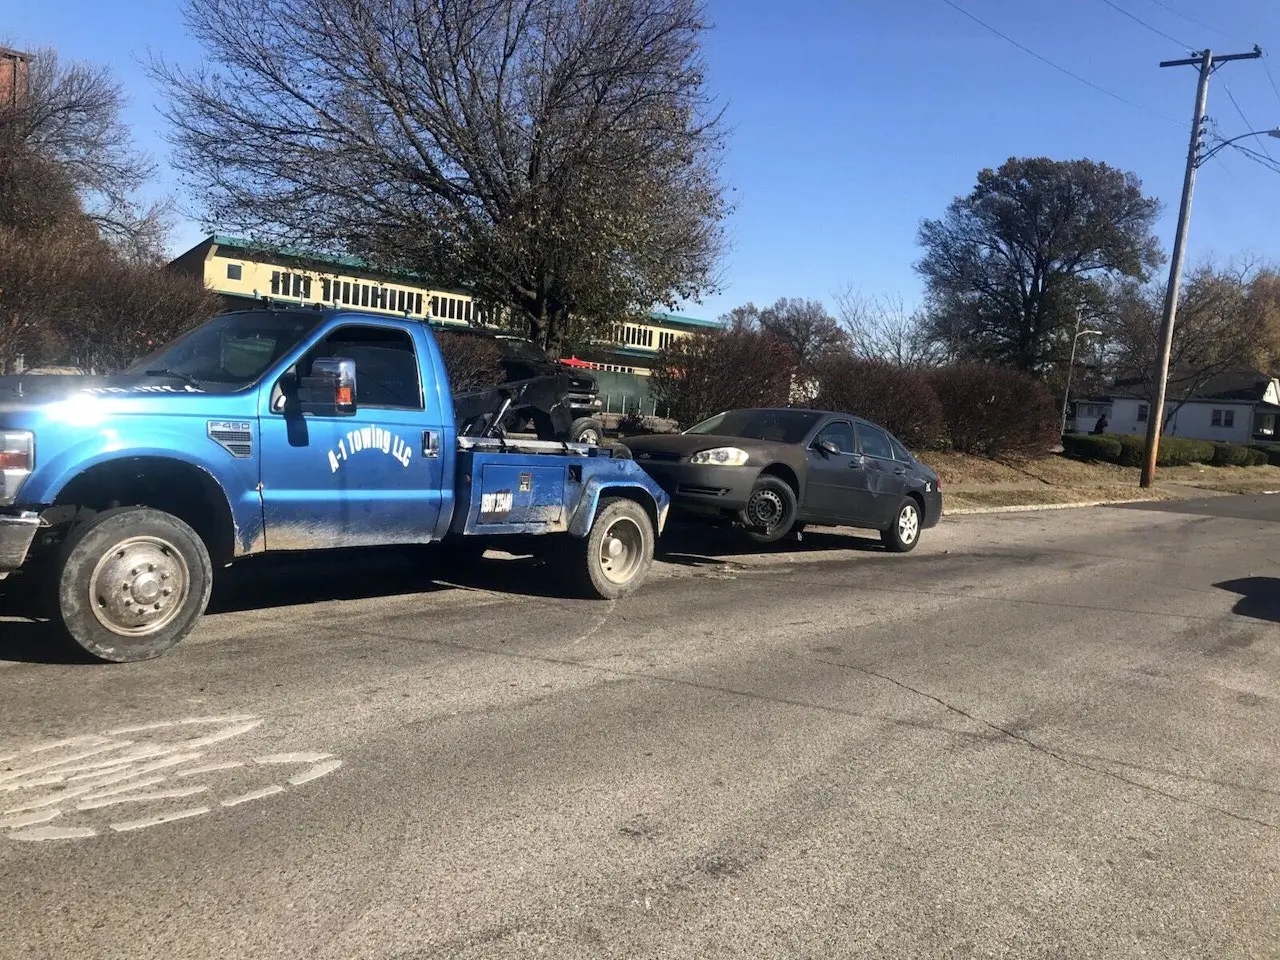 Lonely Tow down a Country Road. Contact Us if you get stuck out of town, give us a call!